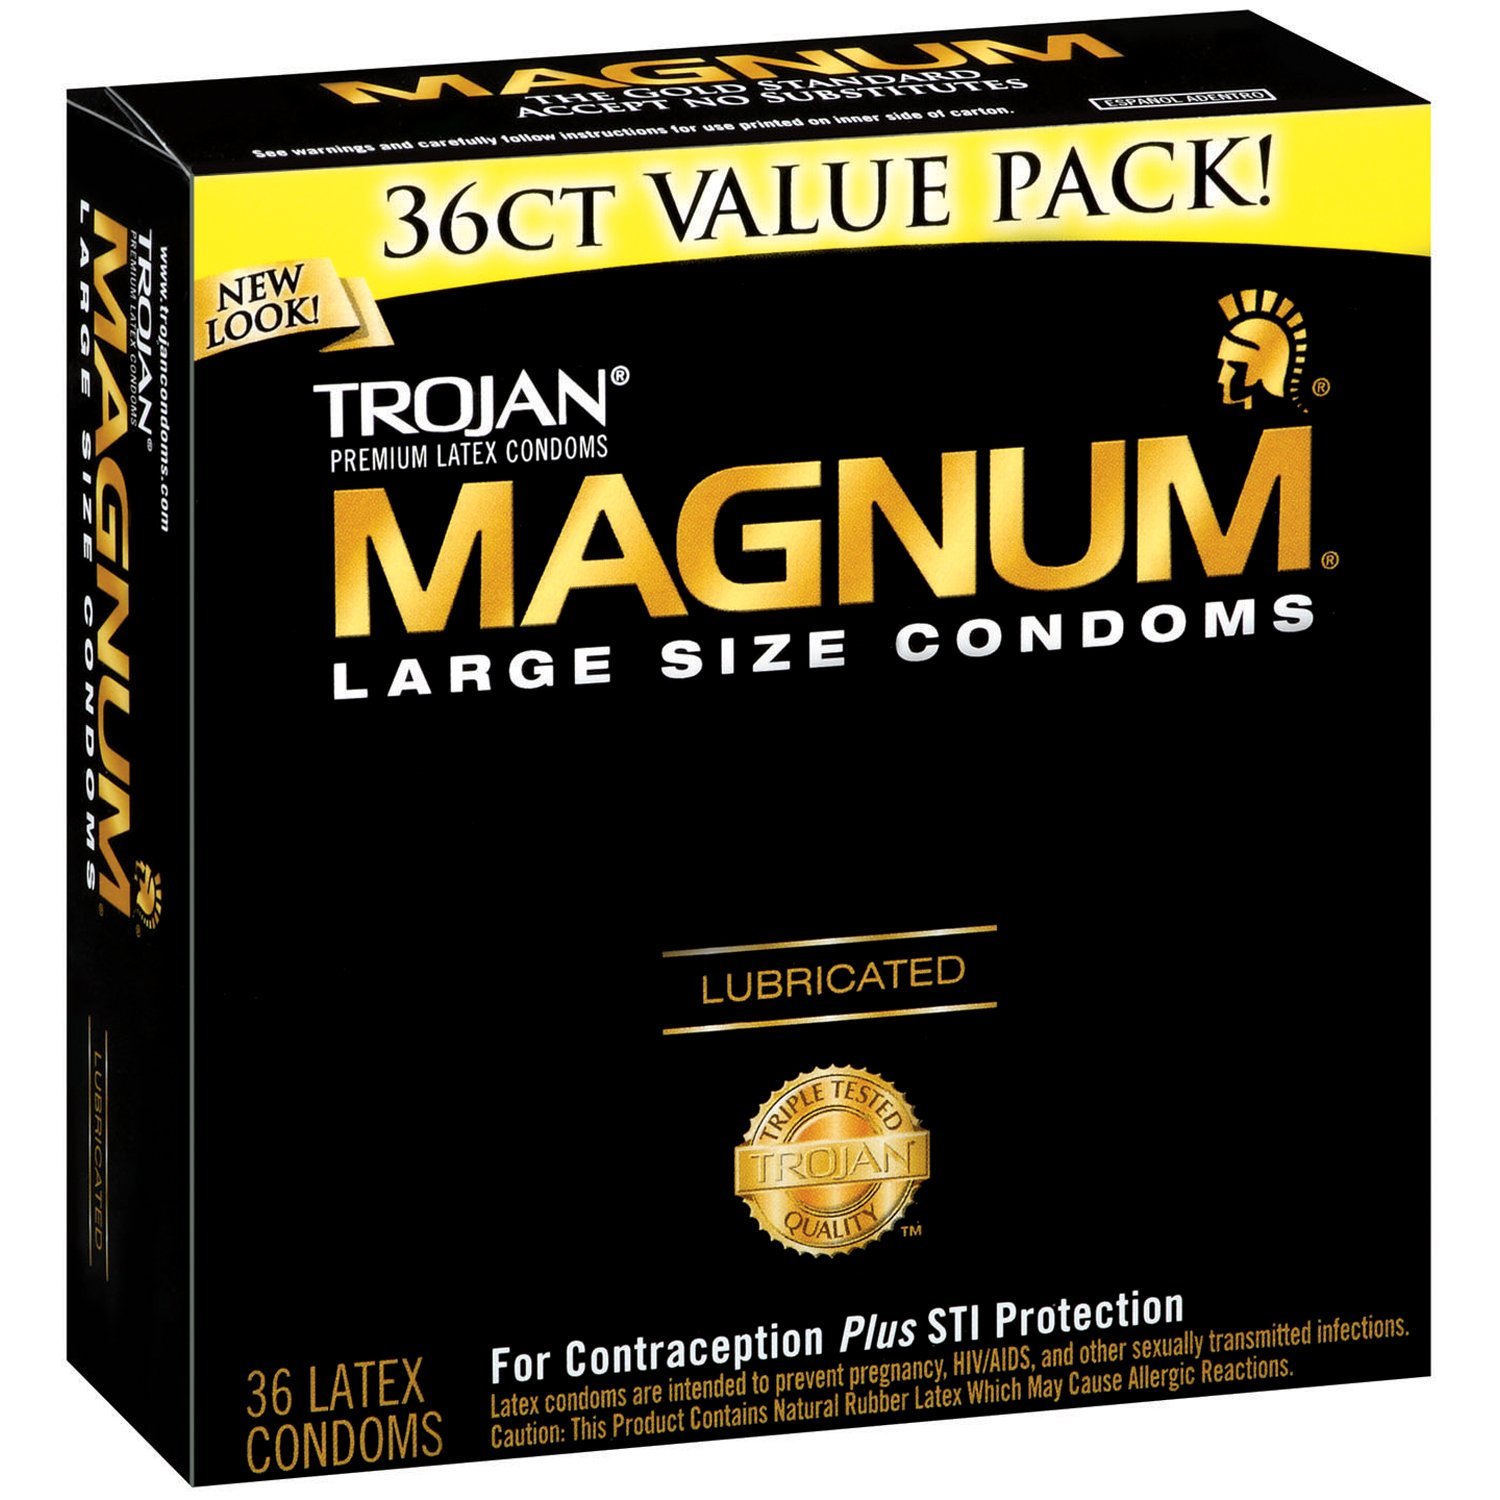 Magnum condoms are designed for most men to fit into so that most purchases include an ego boost